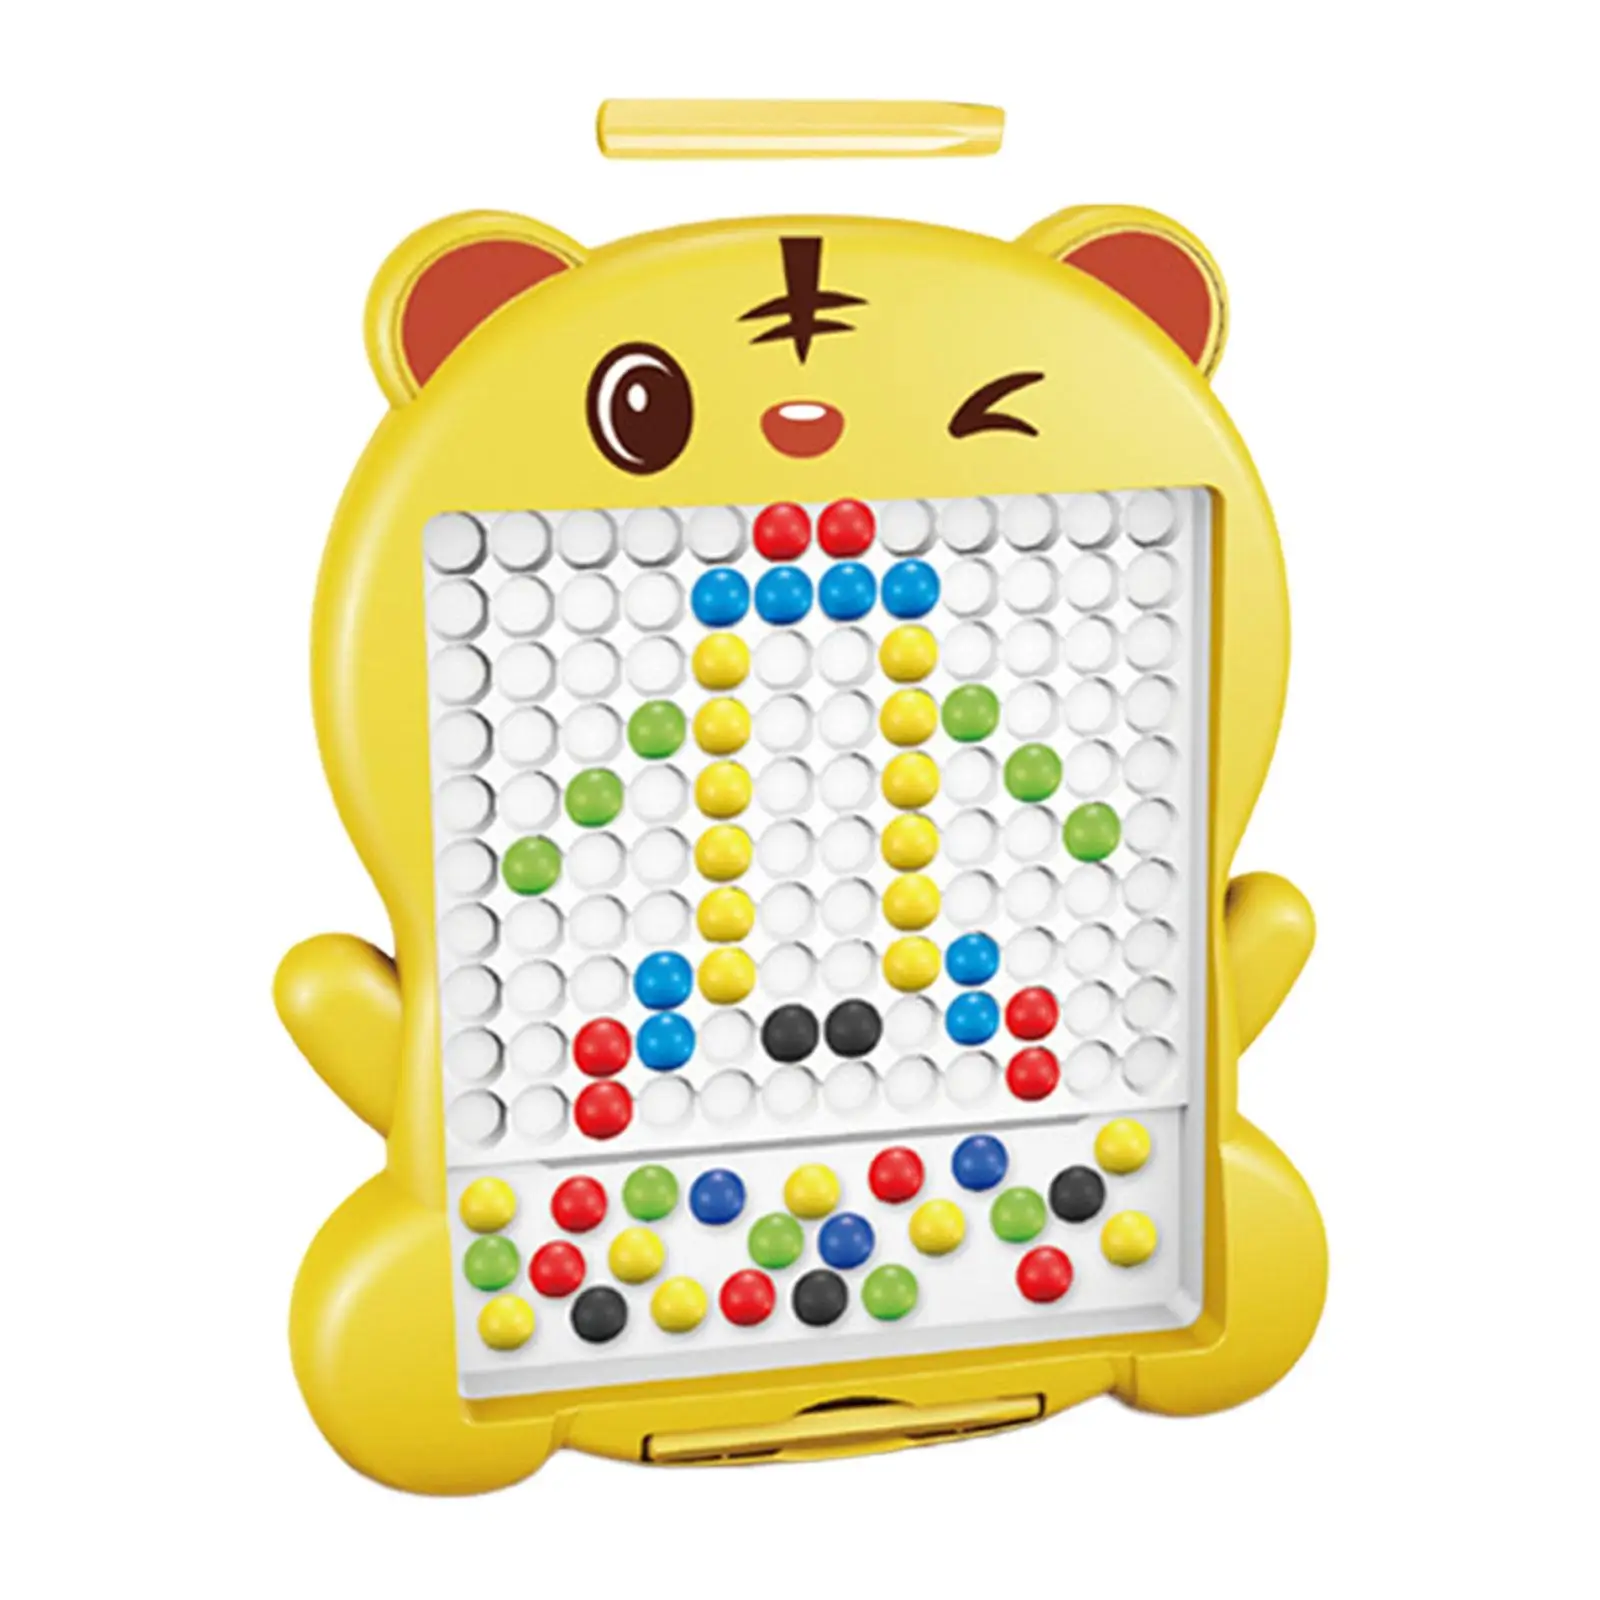 Drawing Board Color Recognition 20 Flash Cards Doodle Board Dot Bead Game for Boys Preschool Children Toddlers Birthday Gift